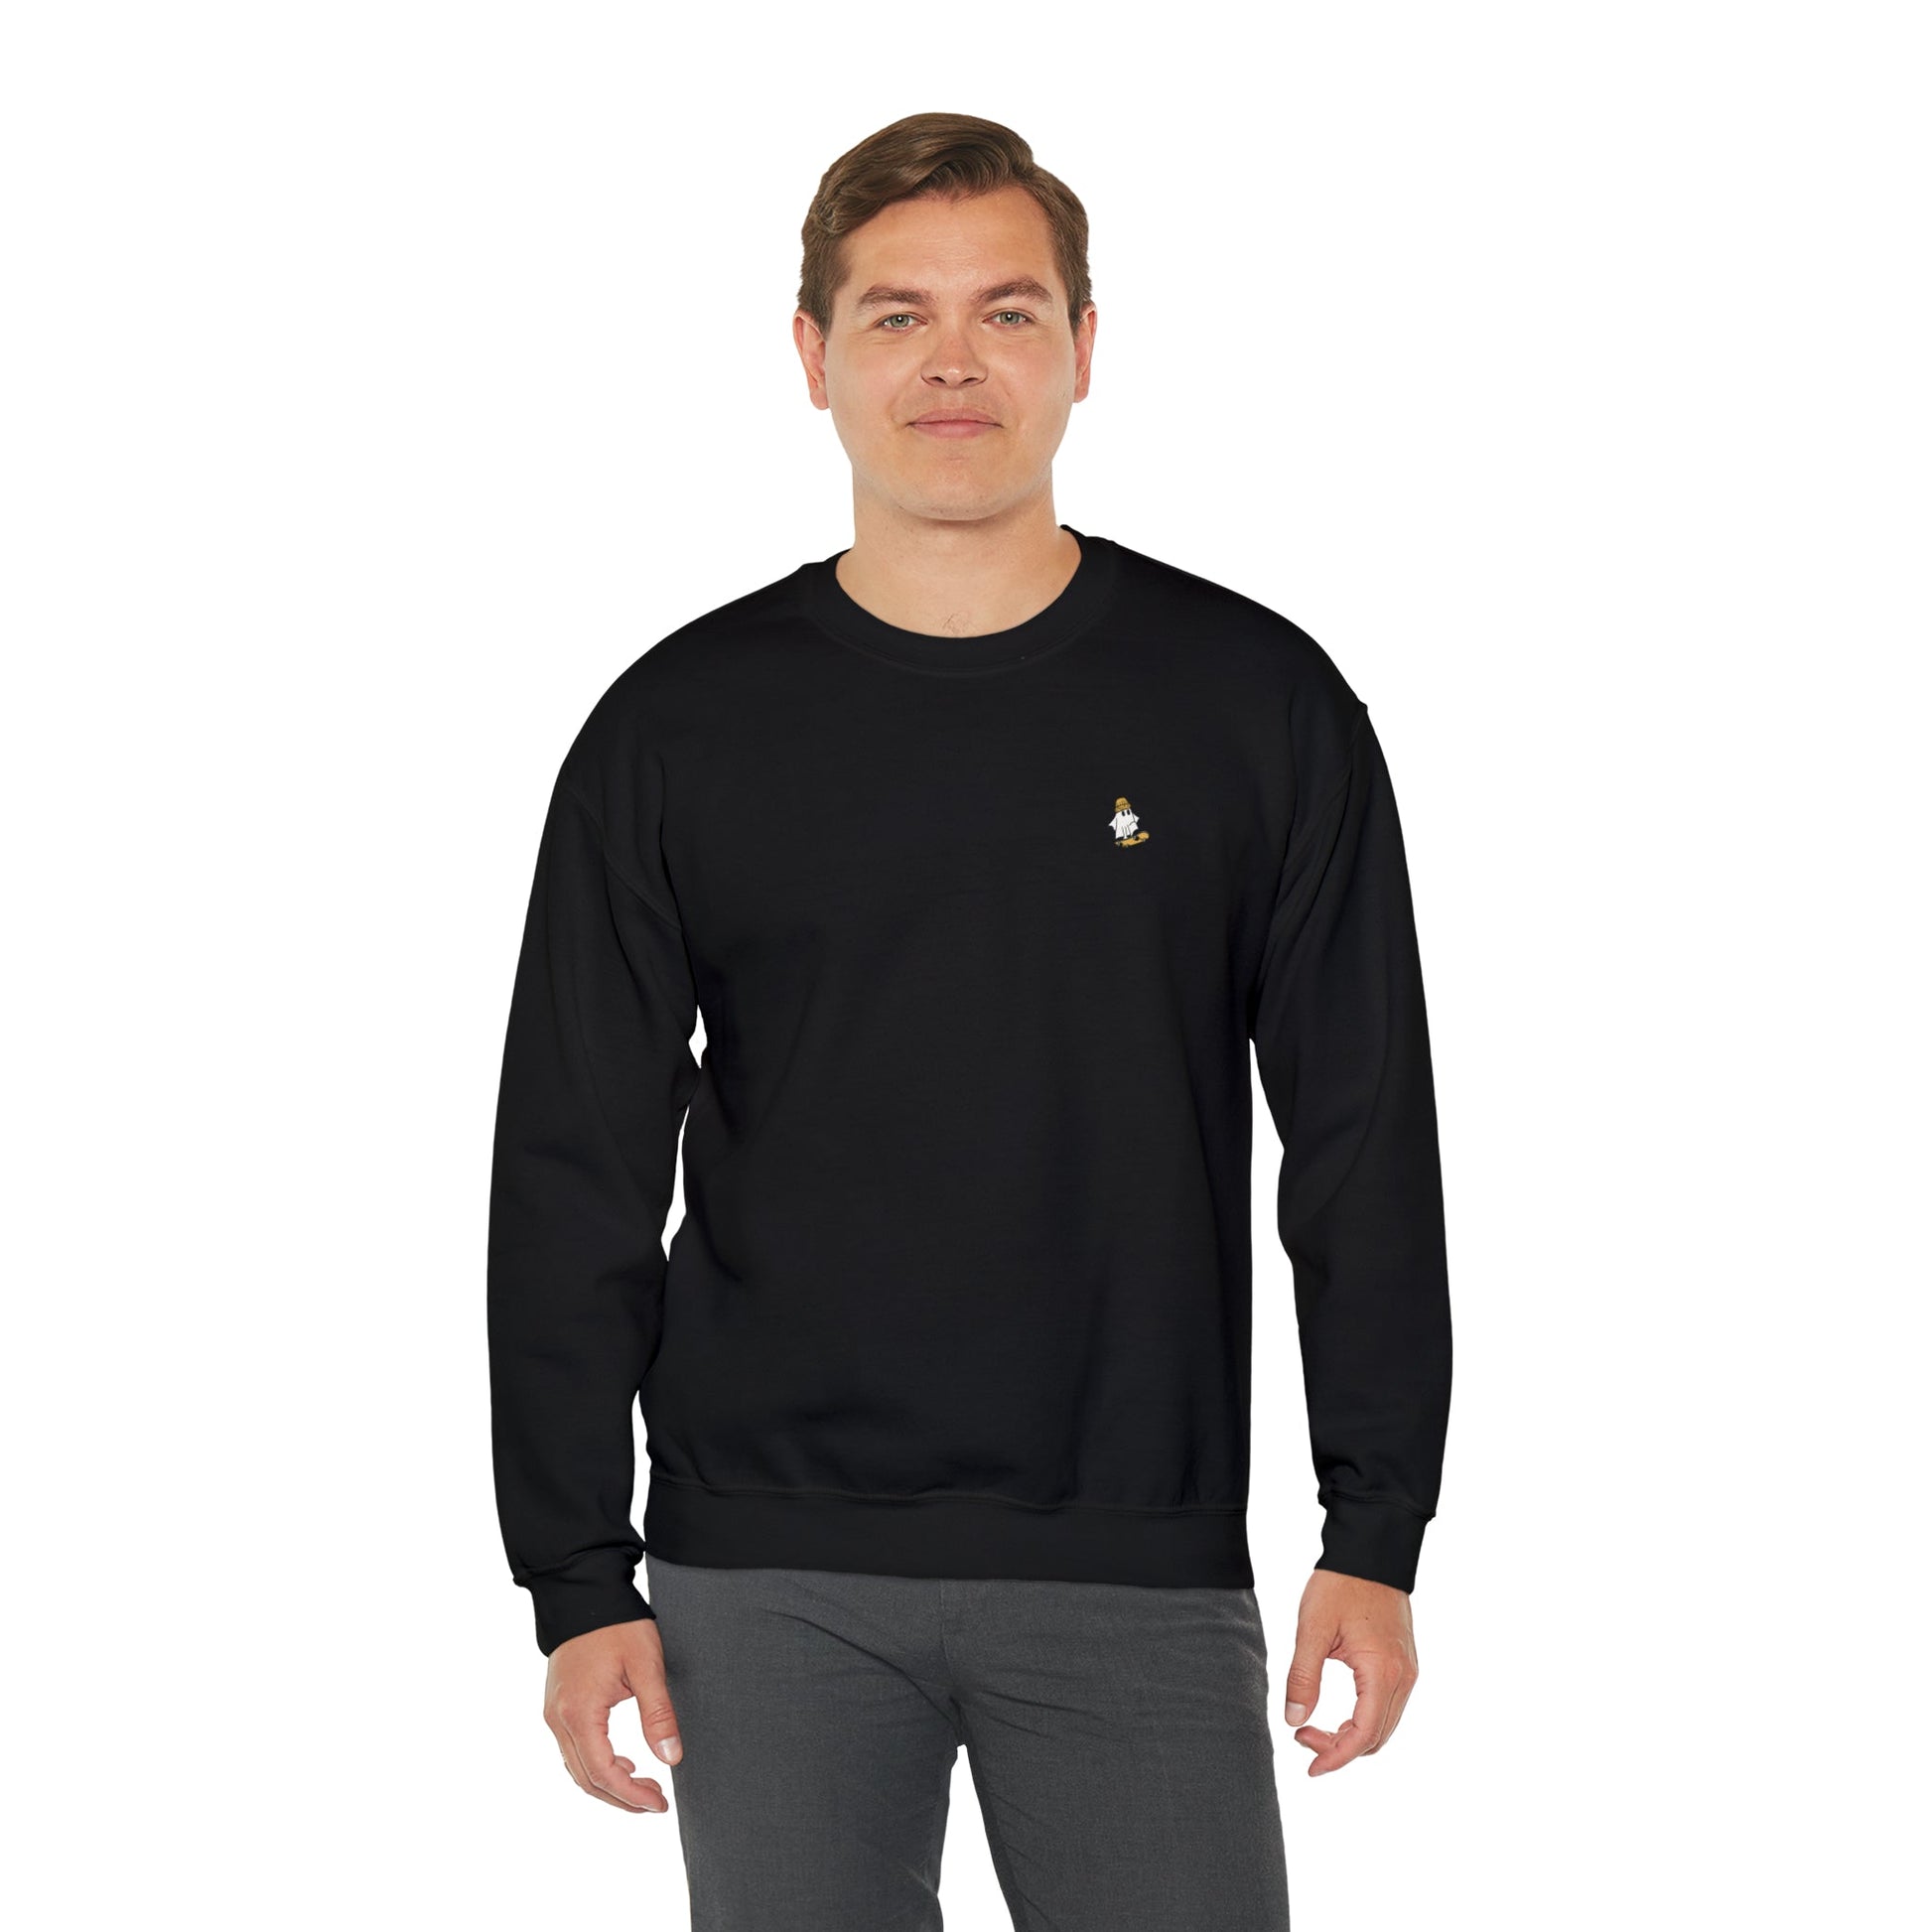 Get trendy with ghost on skateboard  Crewneck Sweatshirt - Sweatshirt available at Good Gift Company. Grab yours for $38 today!